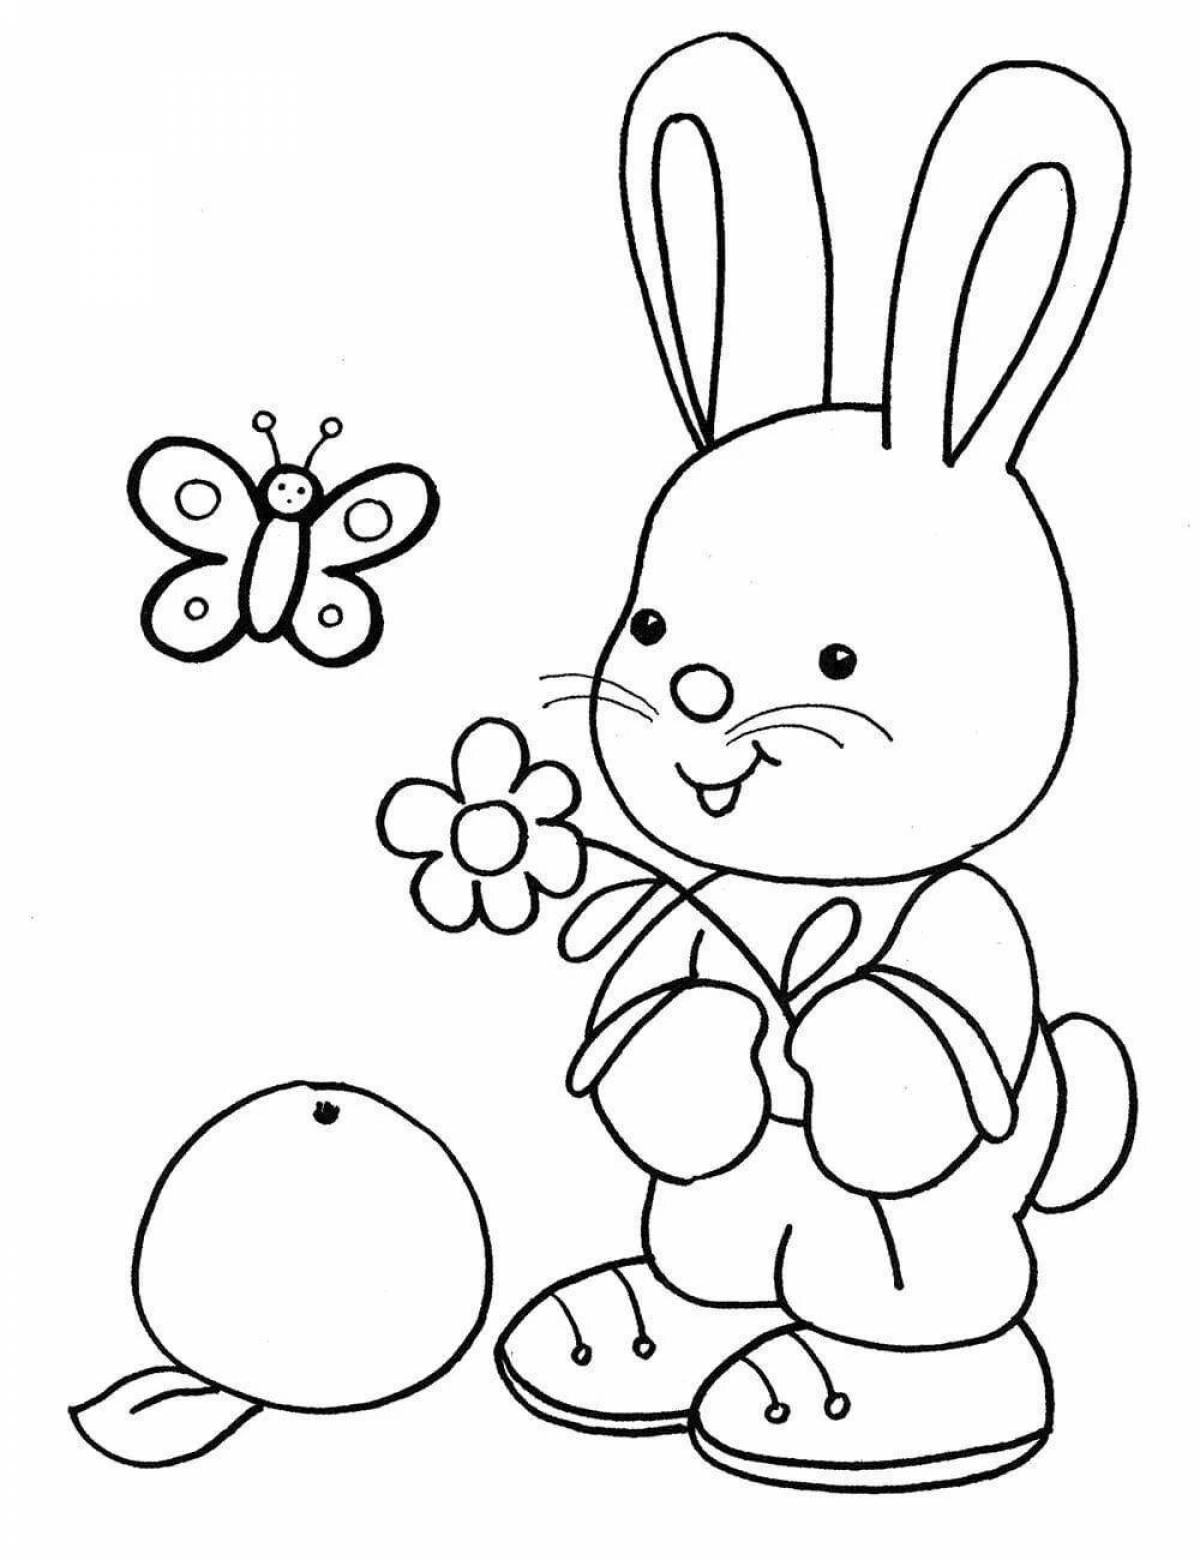 Fun coloring rabbit for children 2 years old